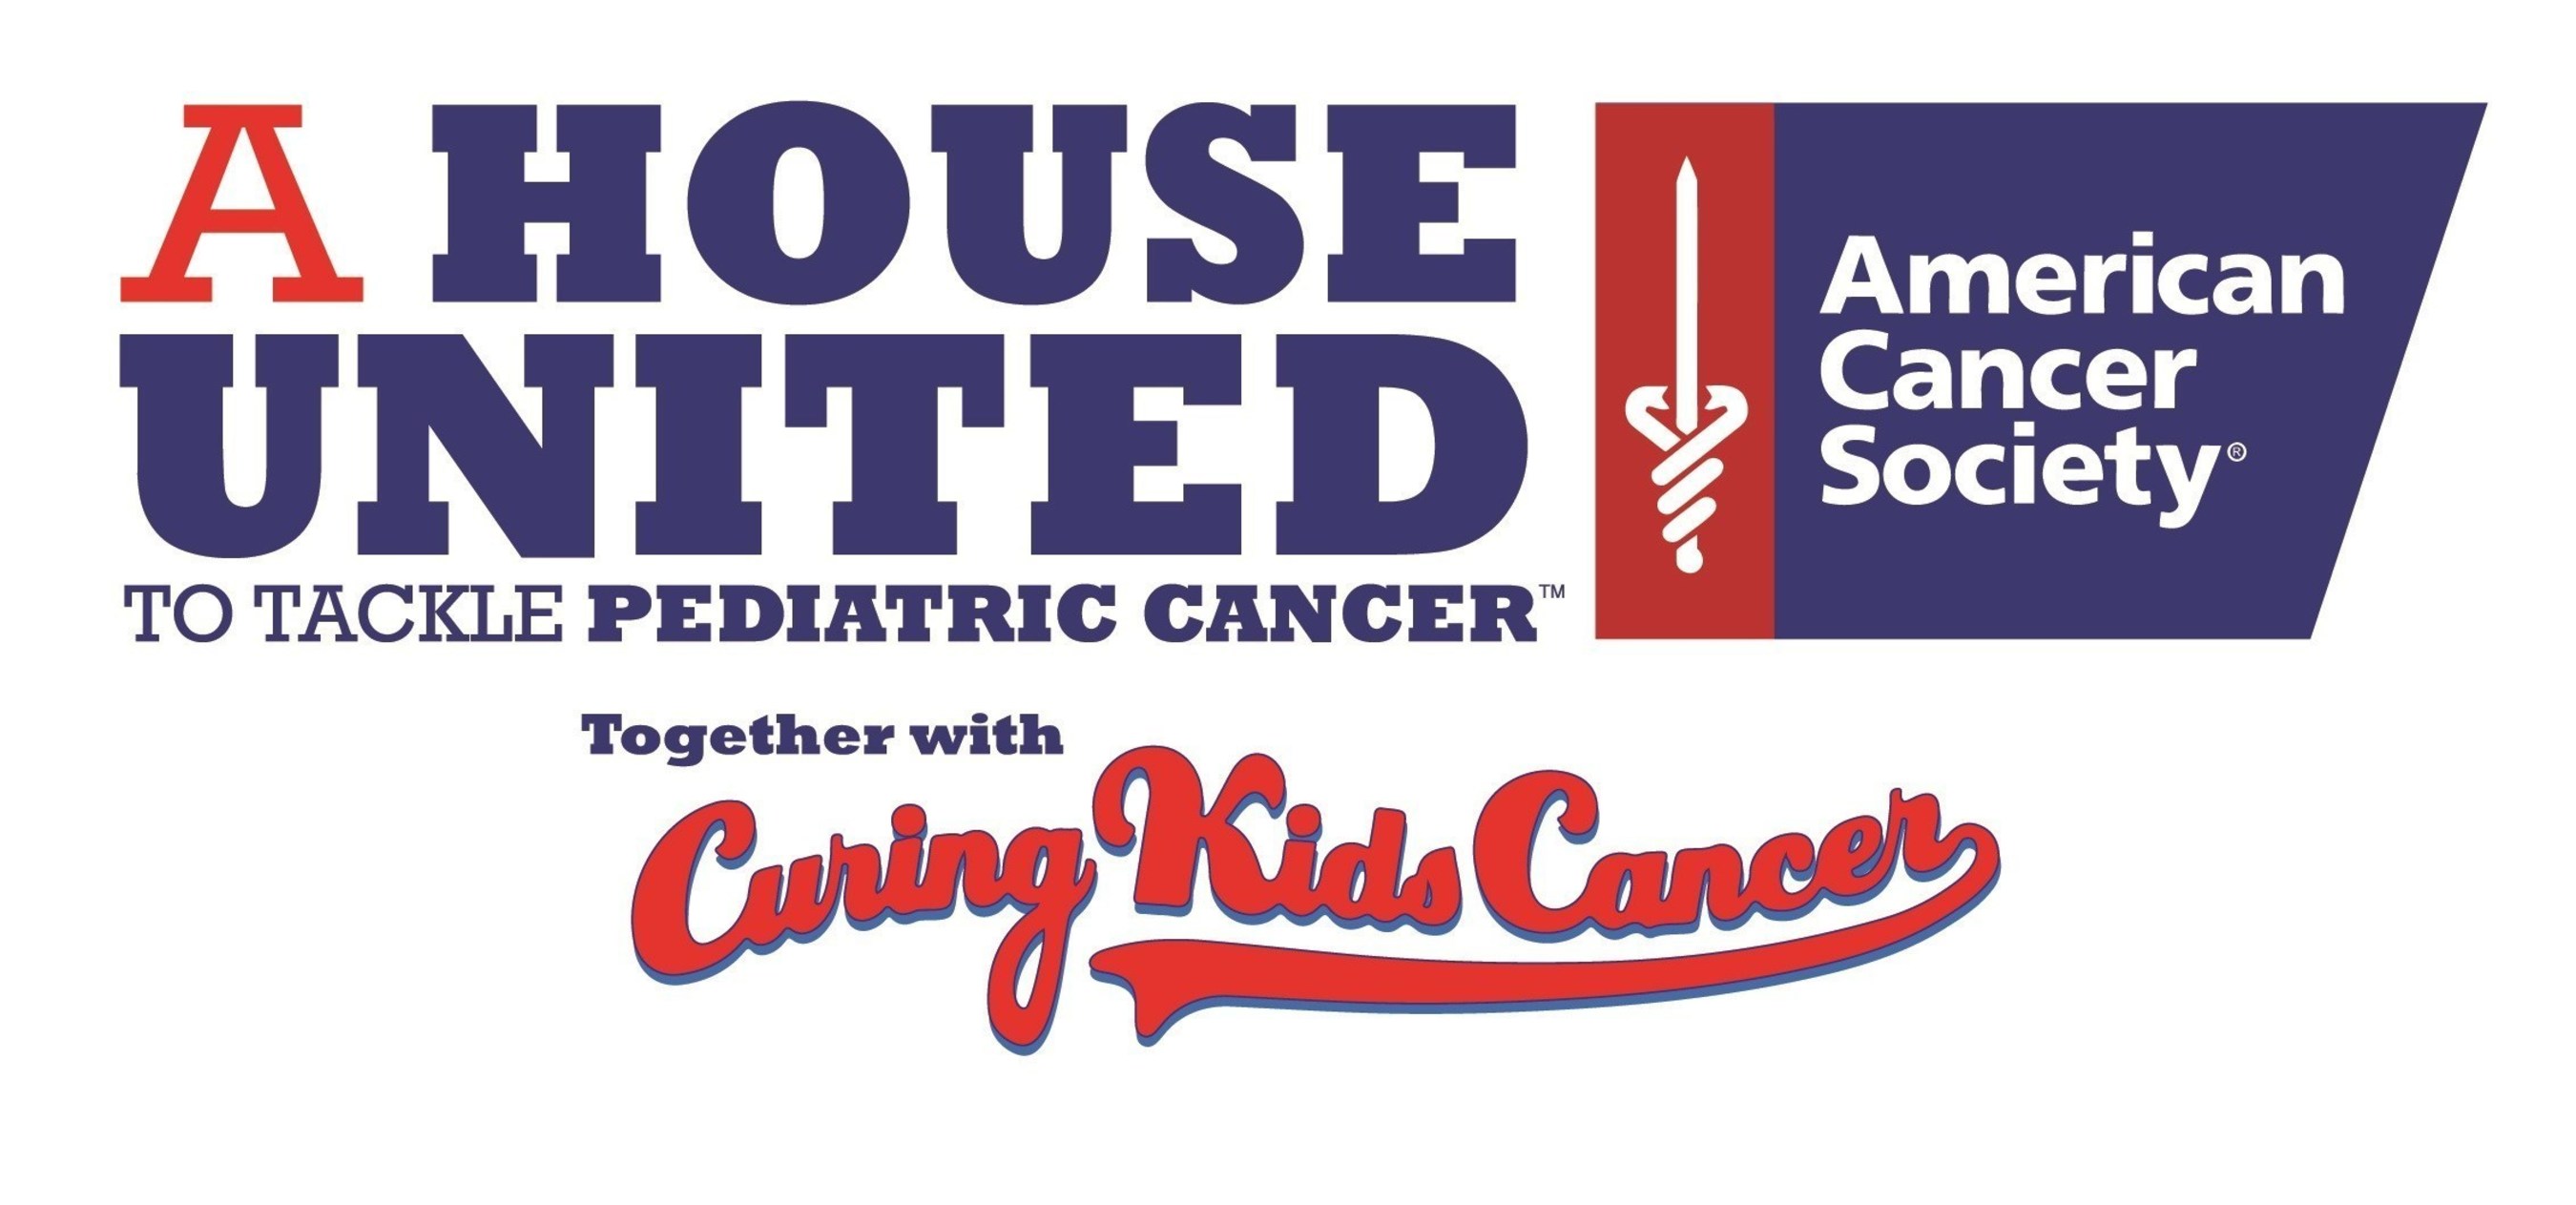 A_House_United_to_Tackle_Pediatric_Cancer____American_Cancer_Society_Logo